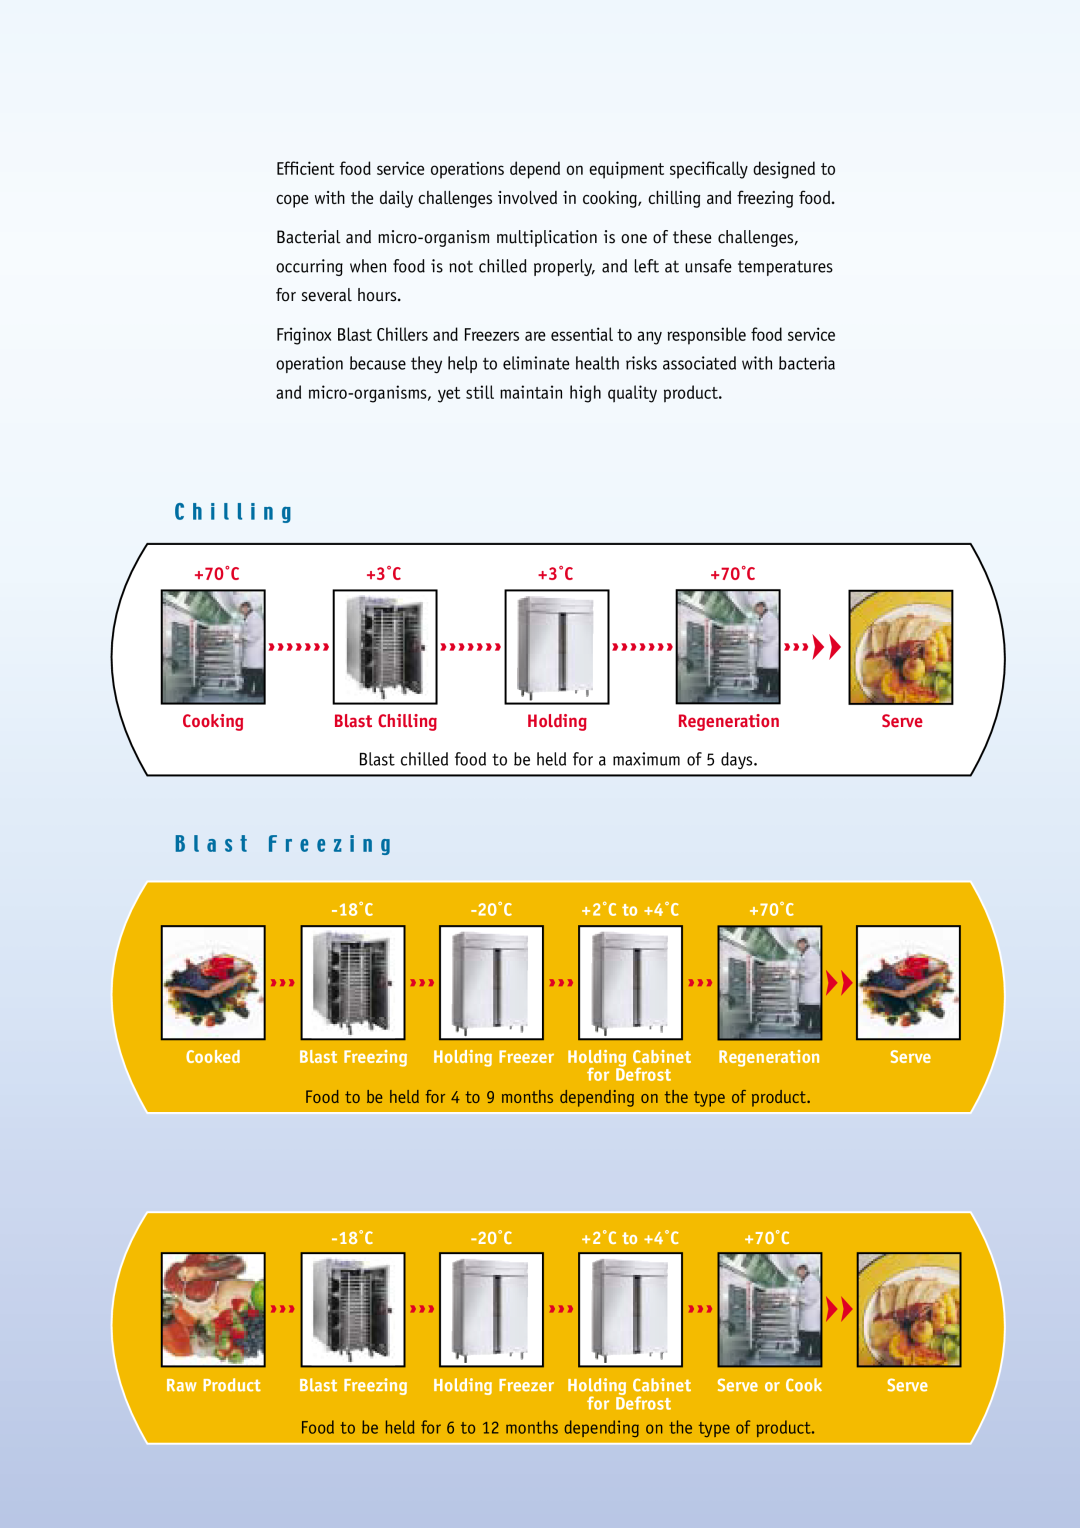 Moffat Blast Chillers and Freezers manual +70˚C, +3˚C, Cooking, Blast Chilling, Holding, Regeneration, Serve 